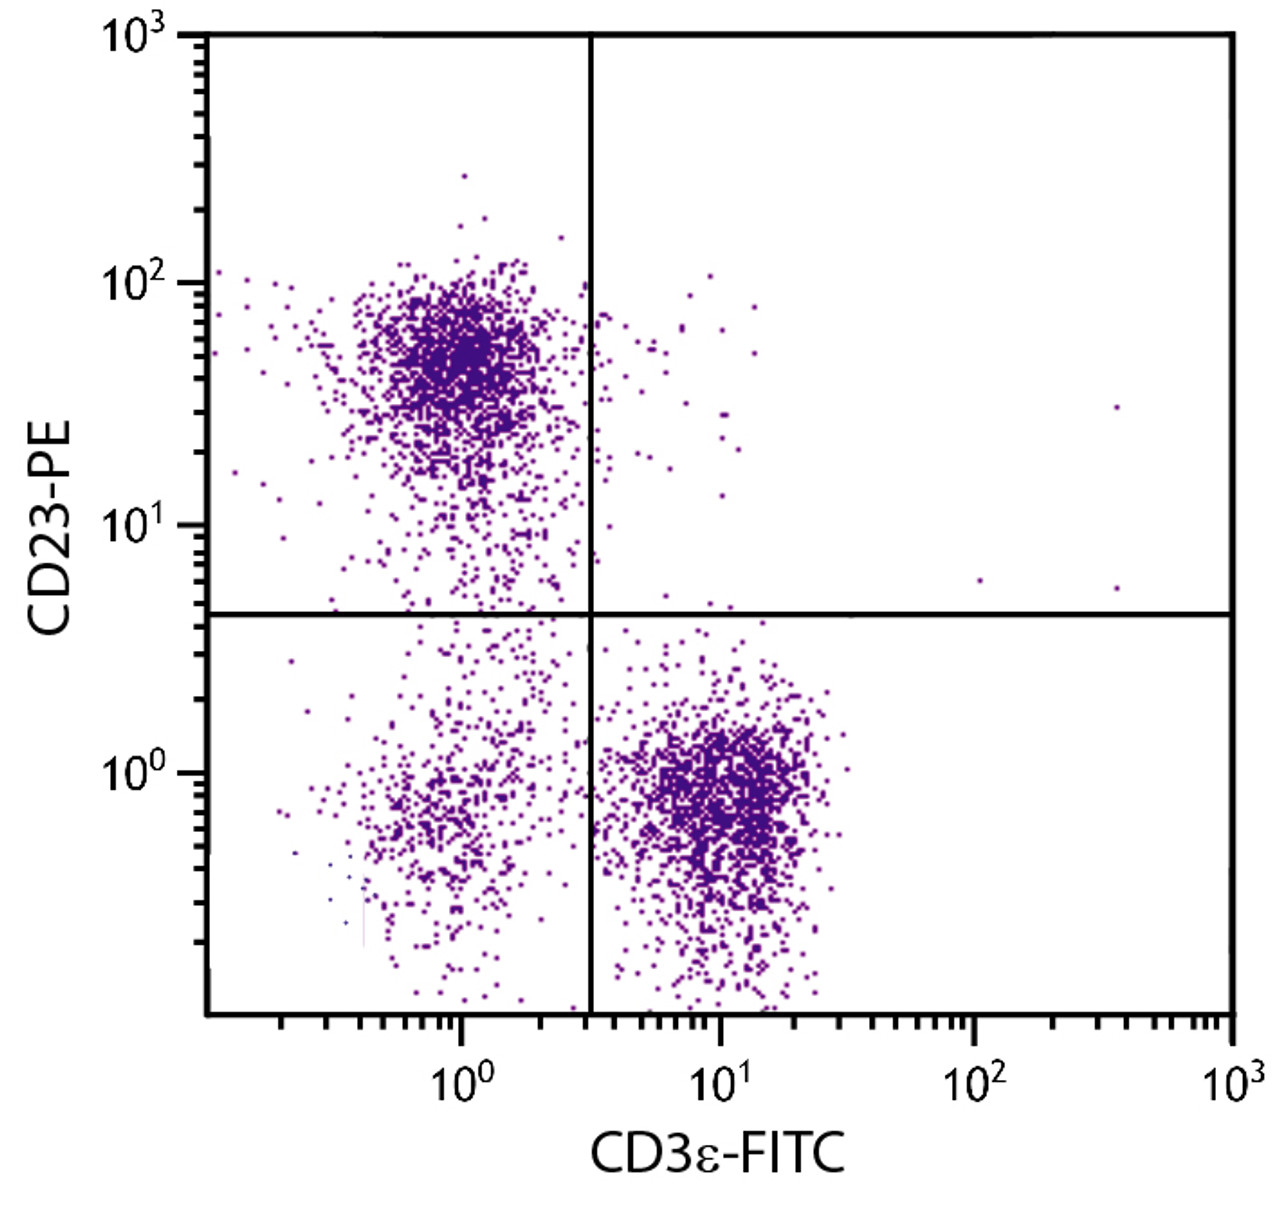 BALB/c mouse splenocytes were stained with Rat Anti-Mouse CD23-PE (Cat. No. 98-686) and Rat Anti-Mouse CD3?-FITC .